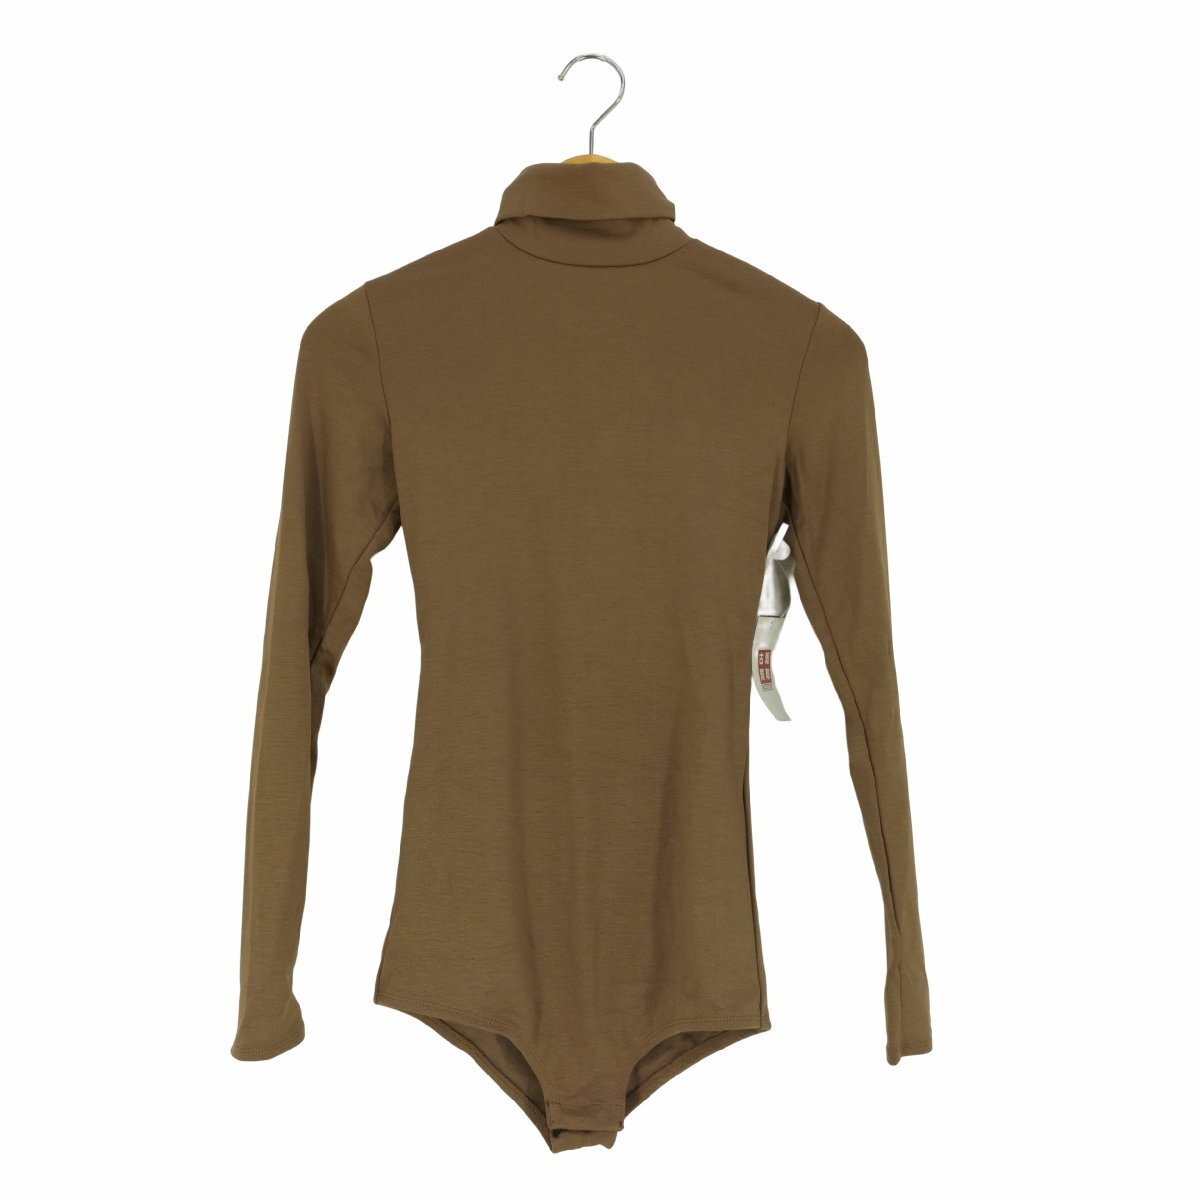 USED古着(ユーズドフルギ) L'Or High neck Body suit レディース FRE 中古 古着 0259_画像1